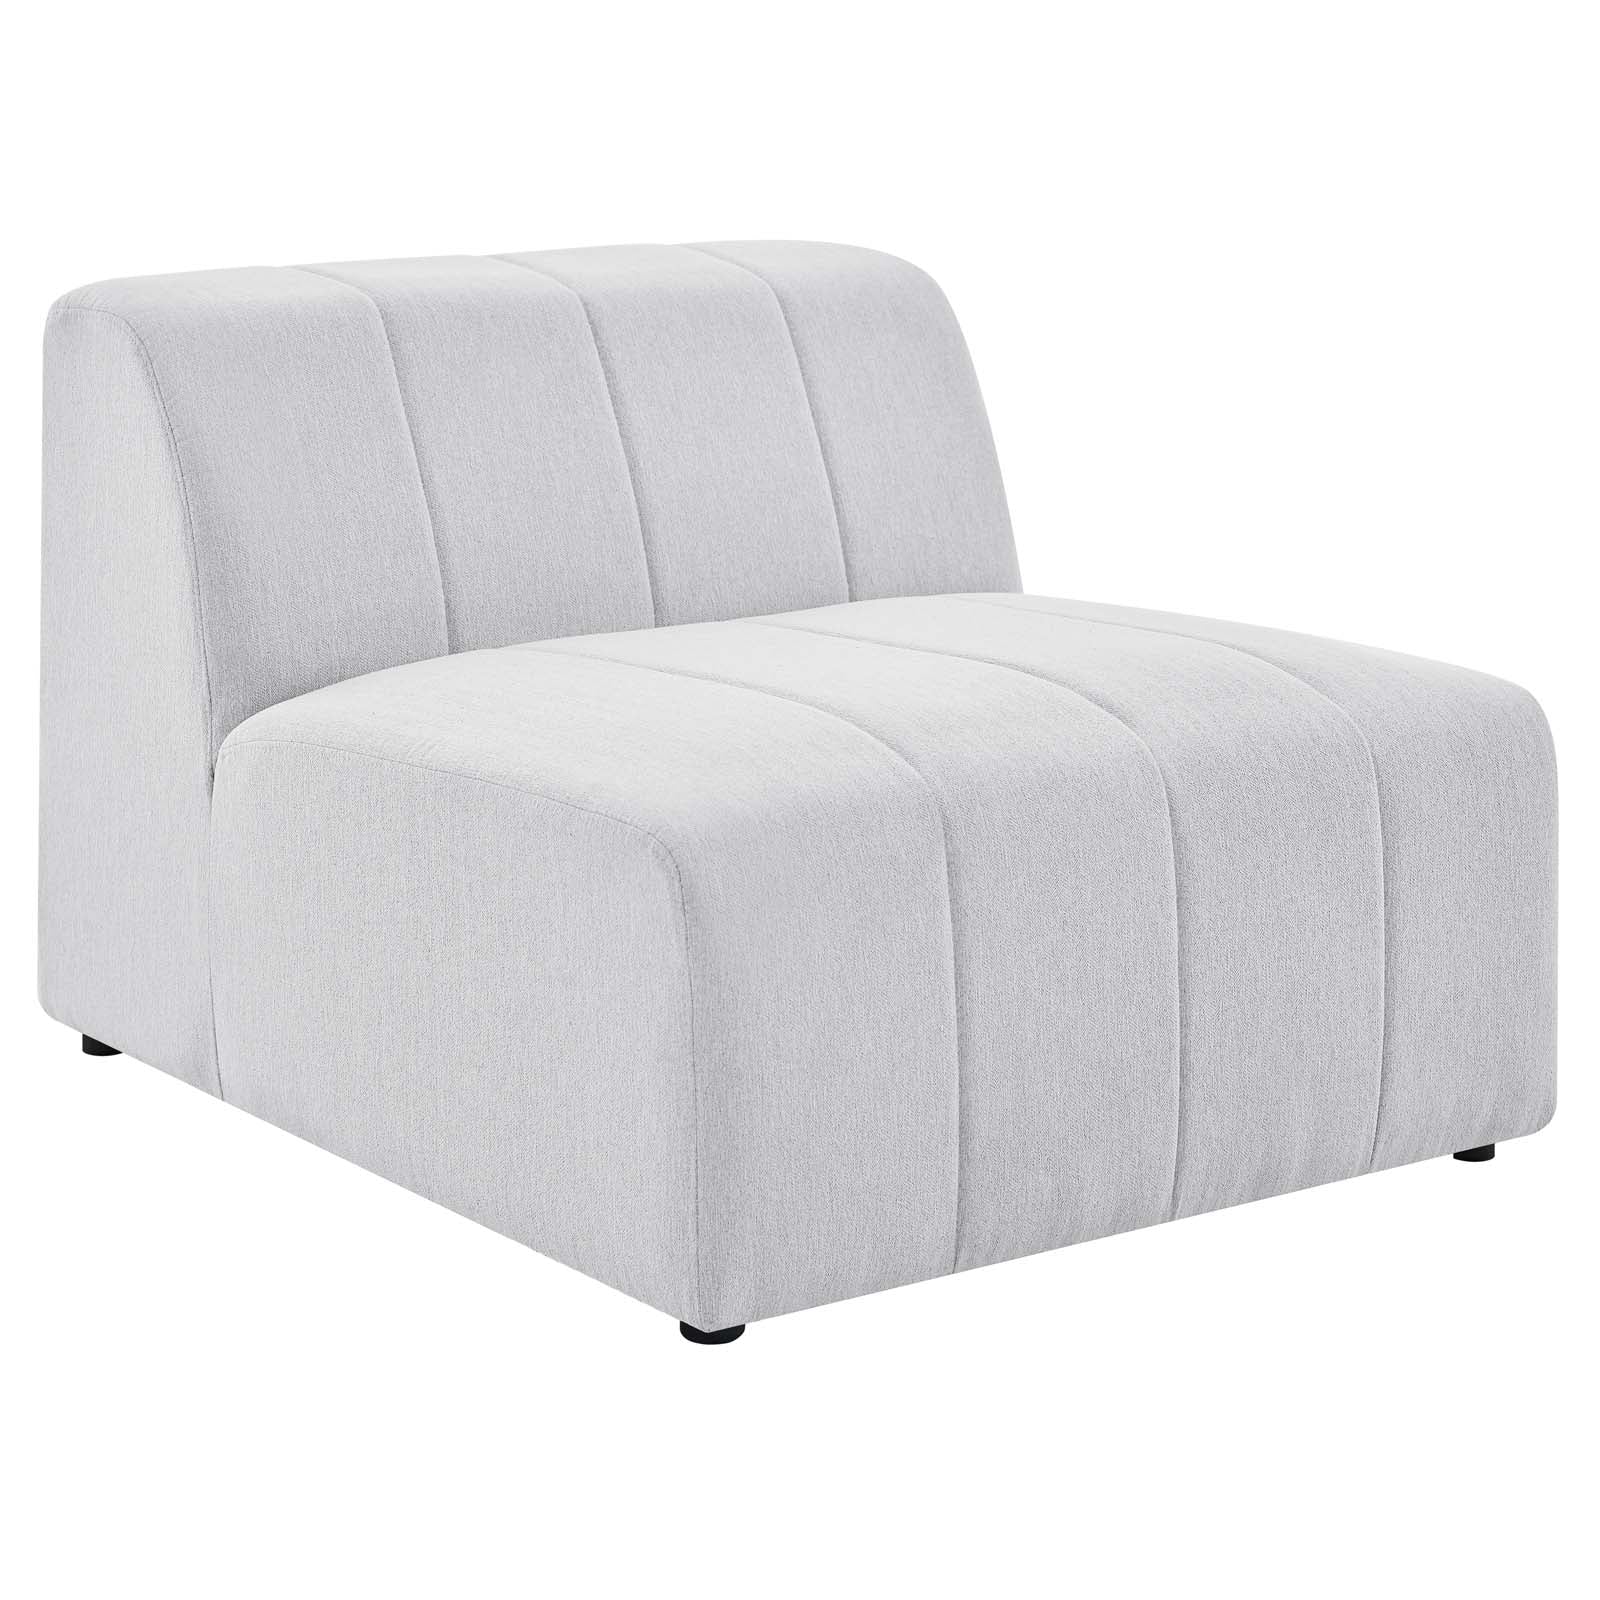 Modway Sectional Sofas - Bartlett Upholstered Fabric 27.5 " H 5-Piece Sectional Sofa Ivory